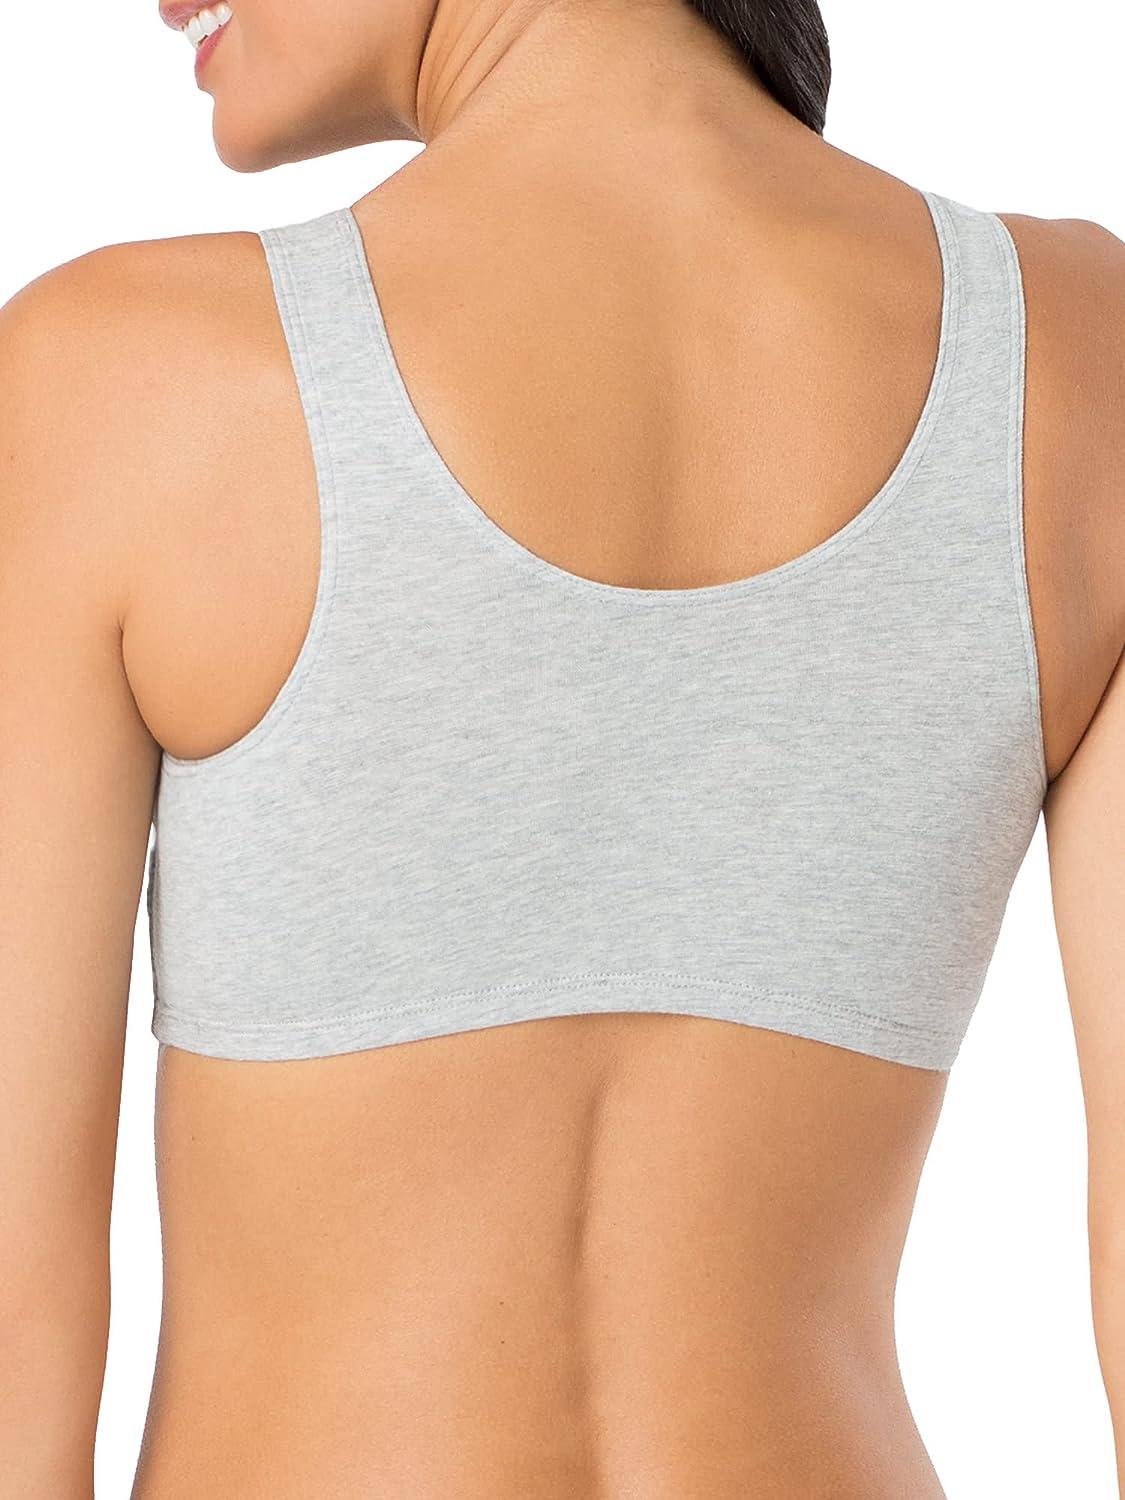 Fruit of the Loom Women's Built Up Tank Style Sports Bra Value